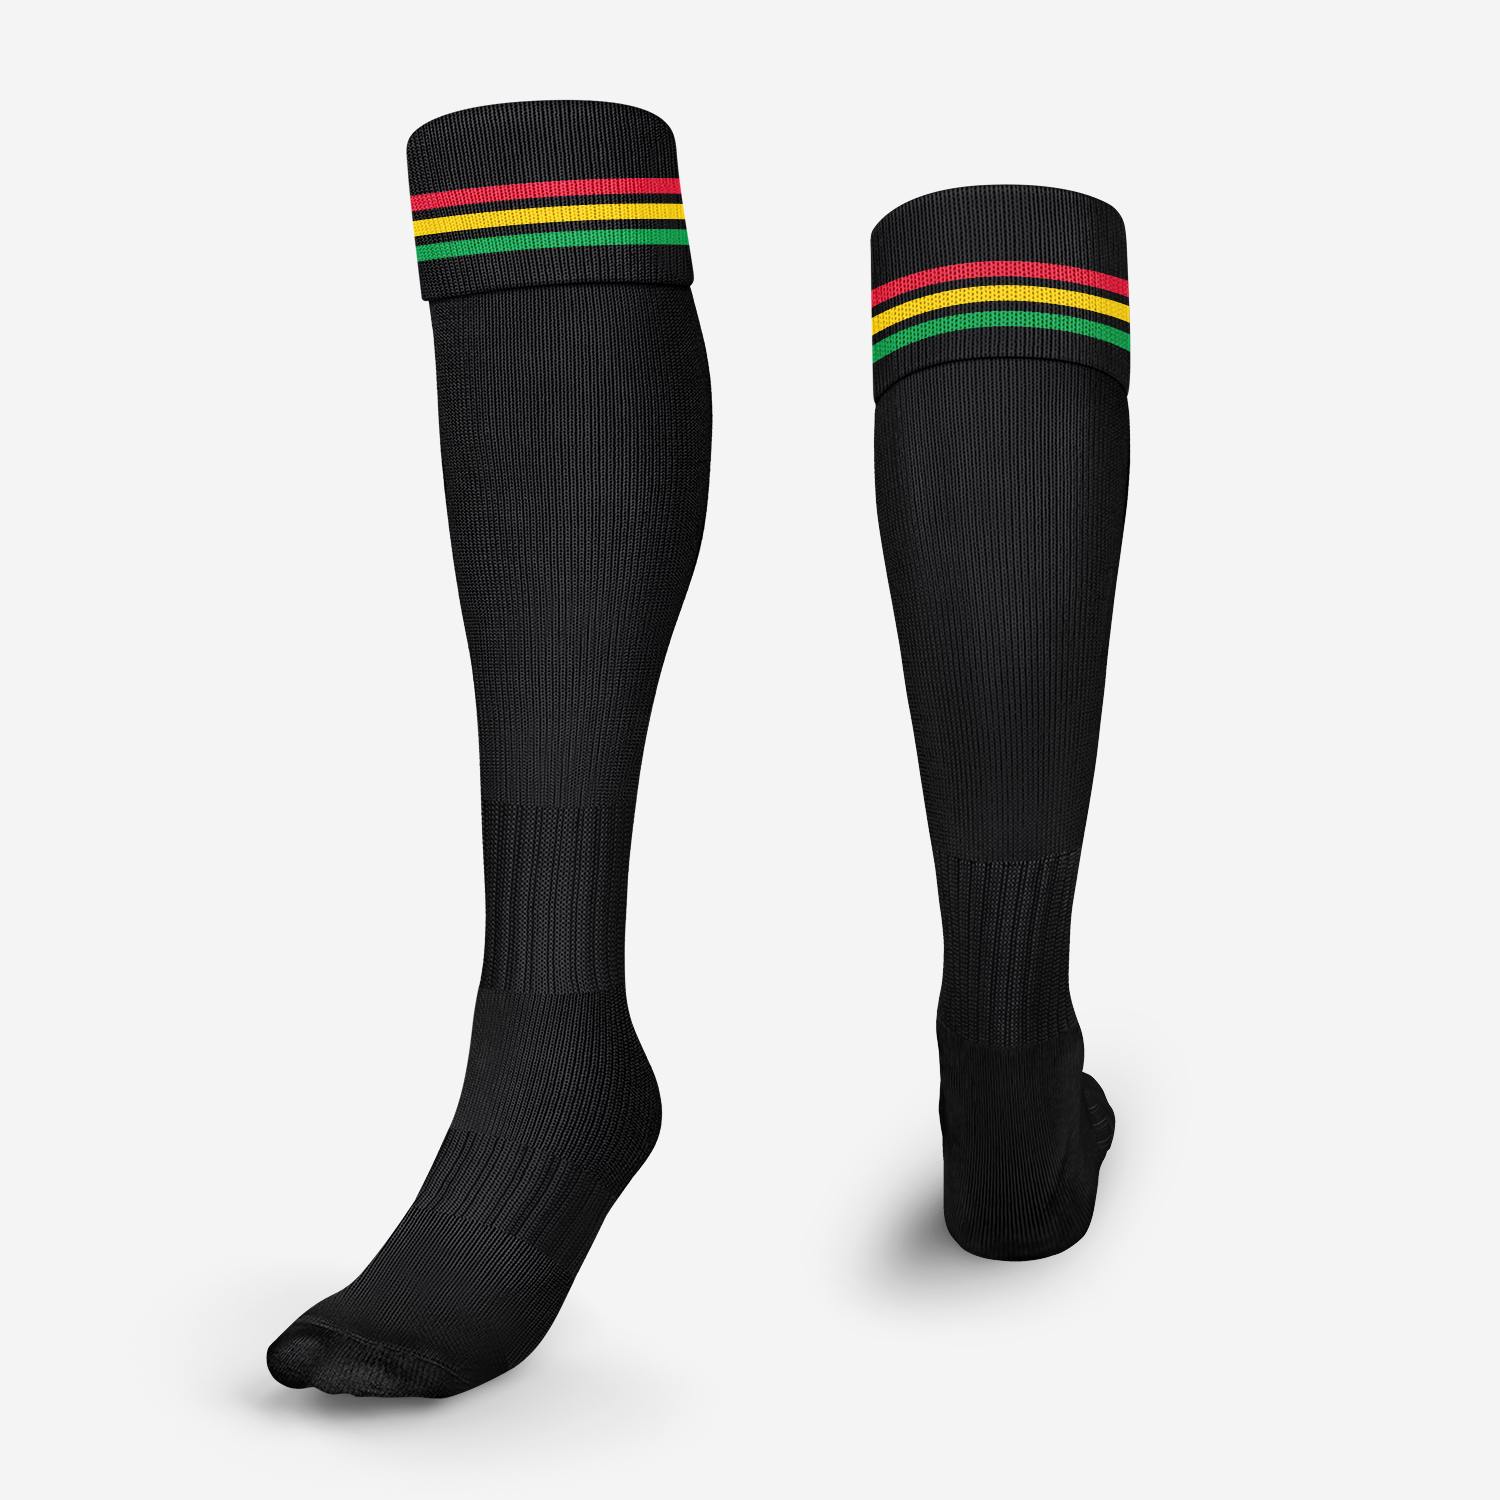 Penrith Panthers youth socks